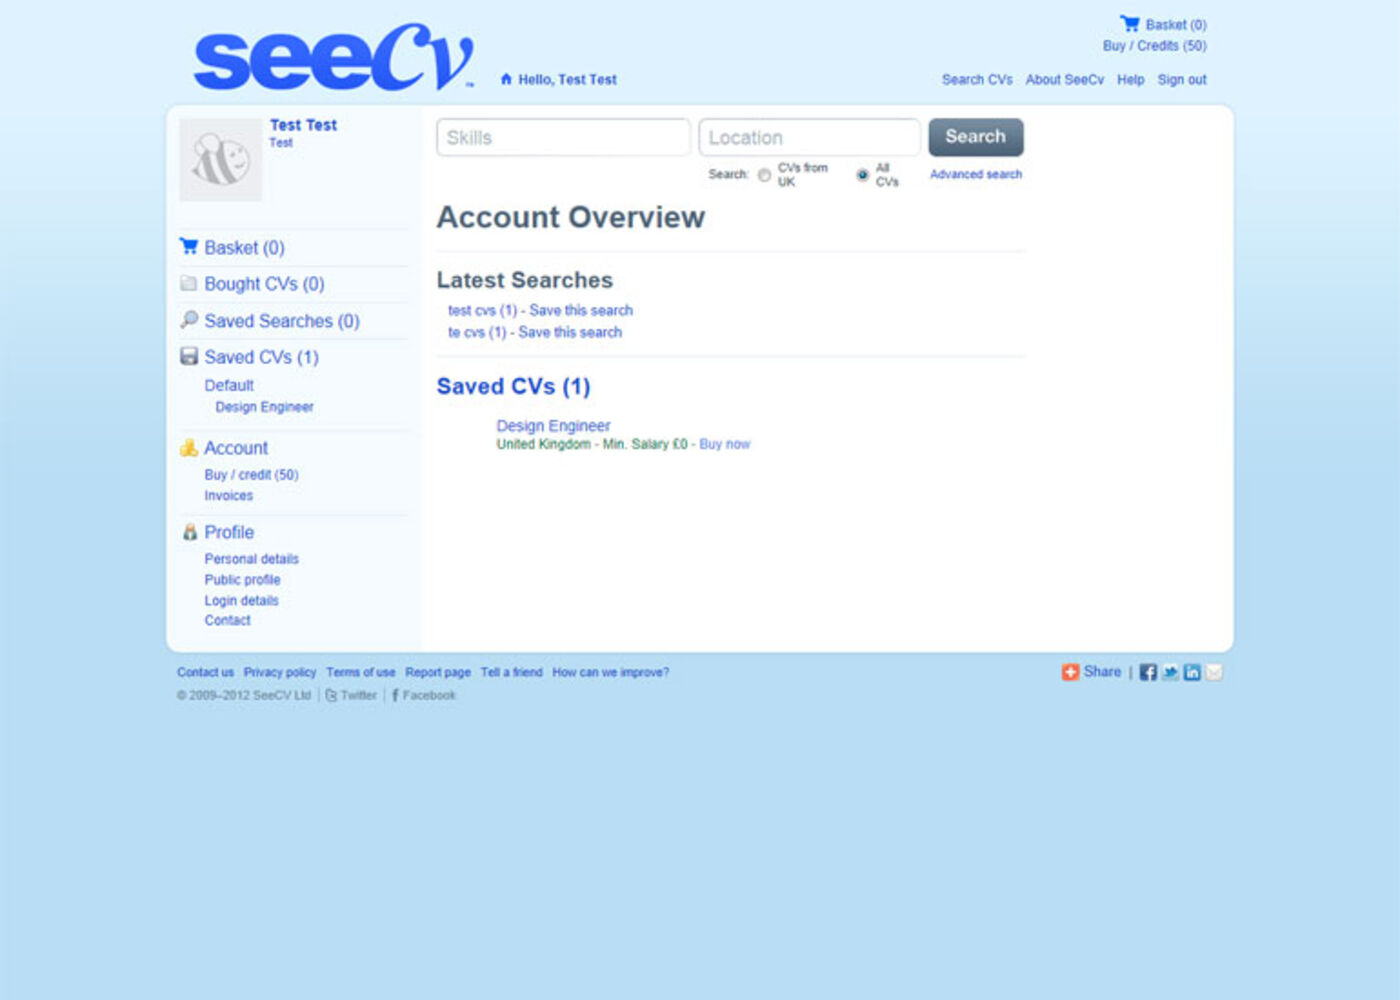 SeeCV Recruiter Page